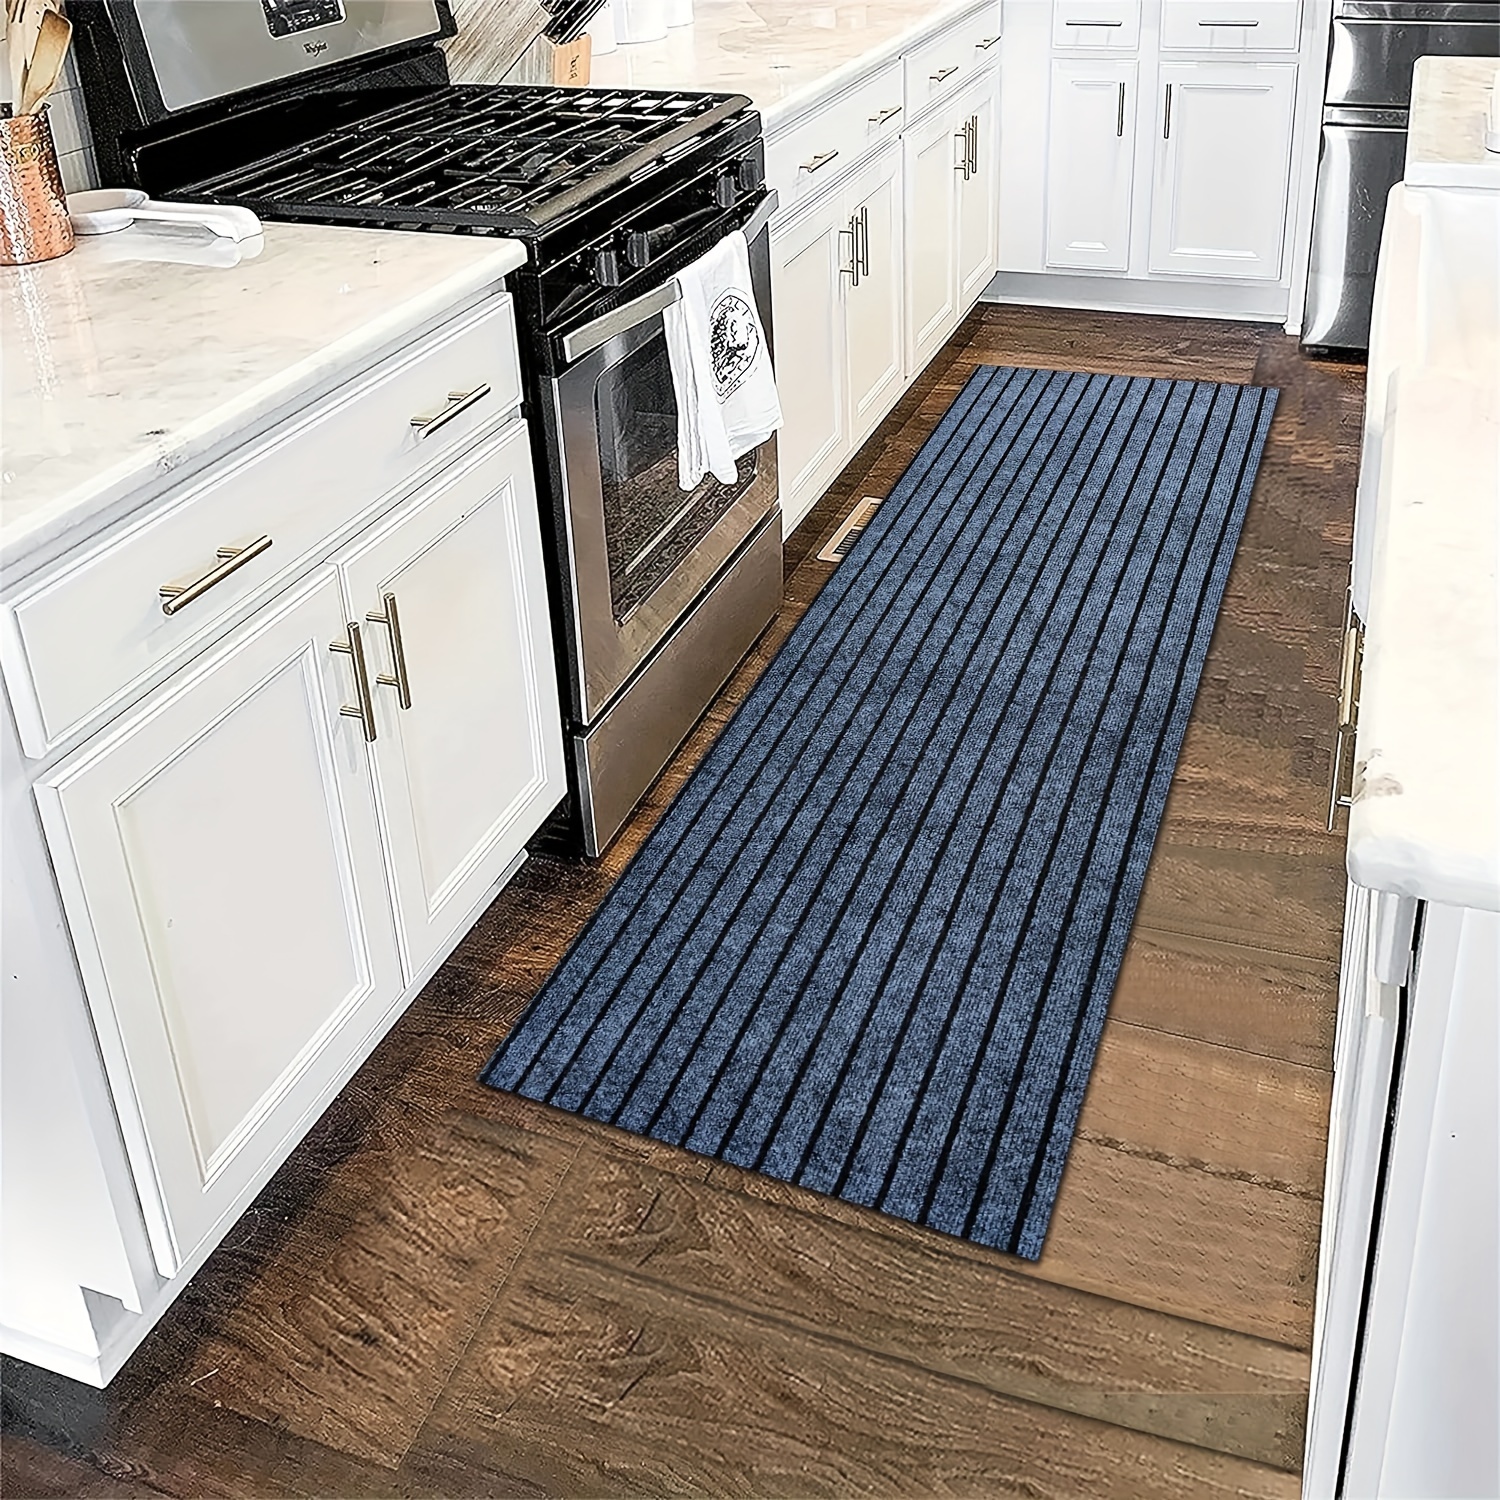 

Durable Striped Non-slip Washable Entryway Doormat - Polyester Gel Fiber With Pvc Backing, 5mm Thickness, Handwash Only, Rectangle Shape For Kitchen, Living Room, Laundry, Bathroom Absorbent Mat Set